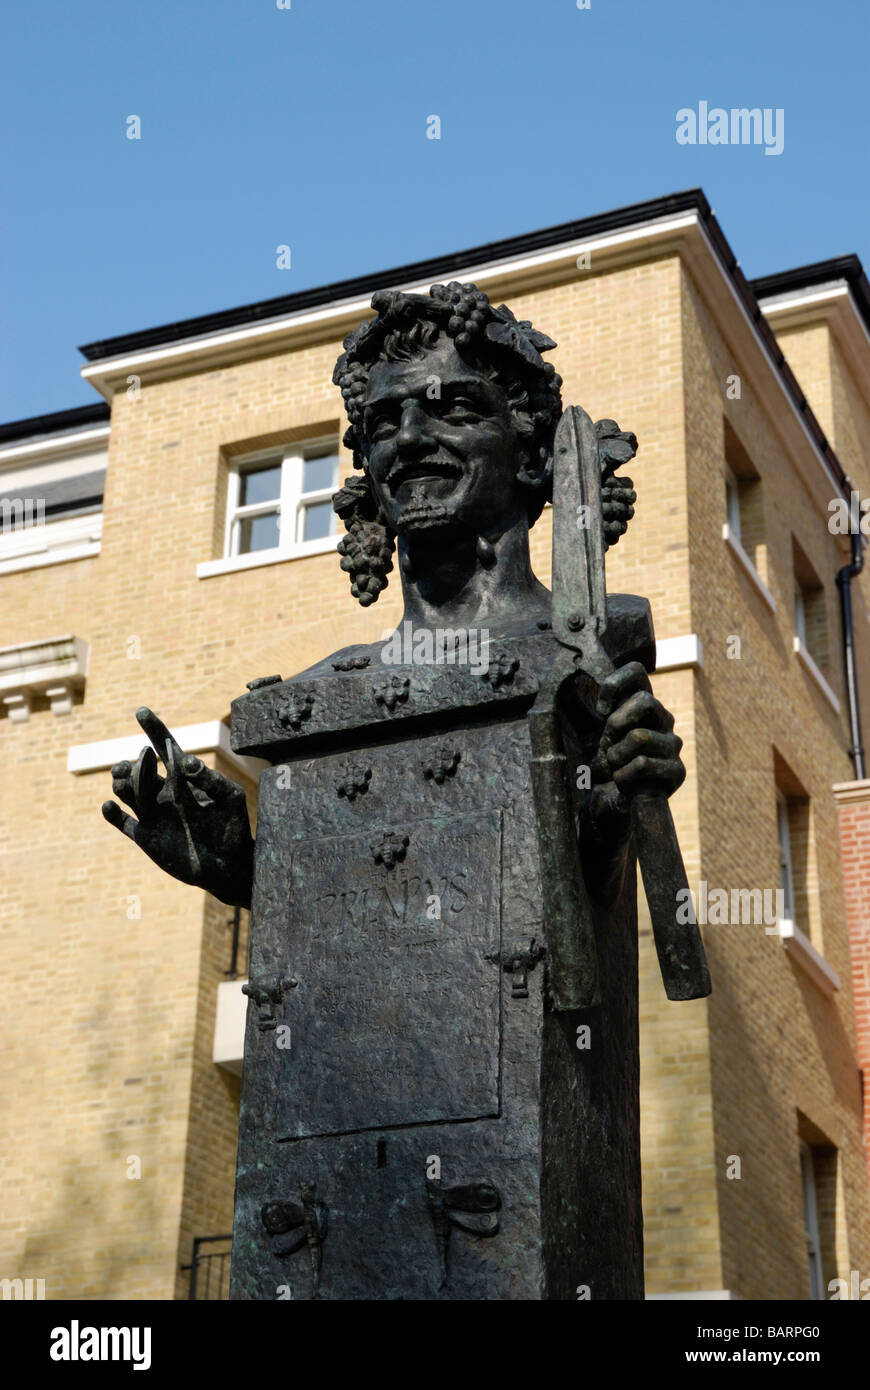 Priapus sculpture by Alexander Stoddart at 68 Vincent Square Pimlico London SW1 Stock Photo